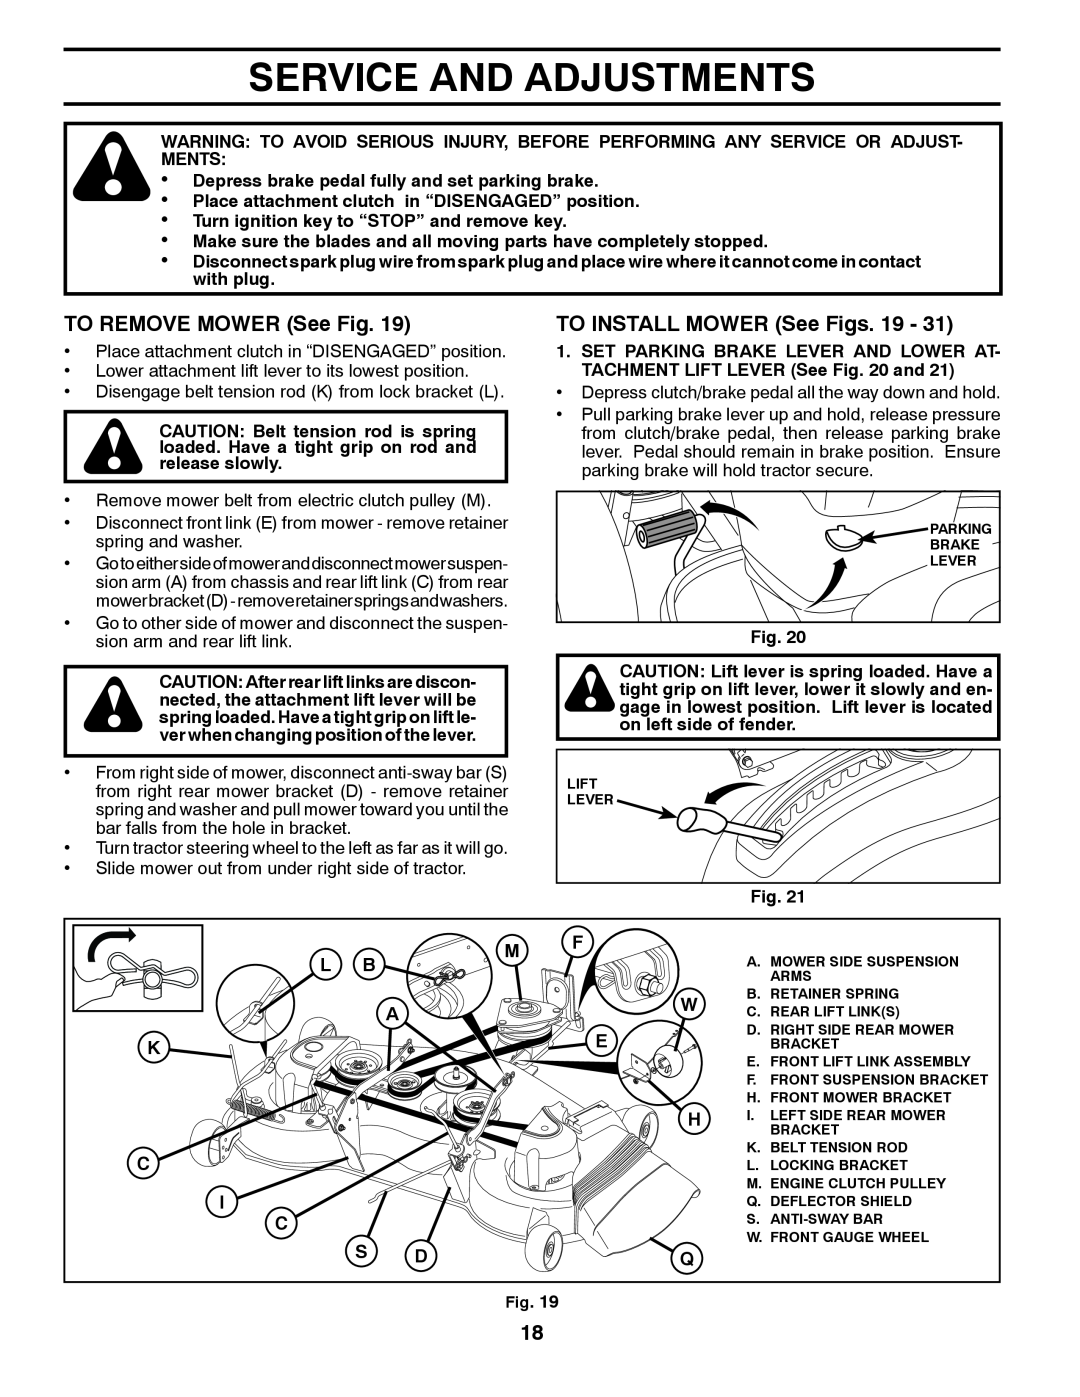 Husqvarna 96045002700, 532 43 86-44 Service And Adjustments, TO REMOVE MOWER See Fig, TO INSTALL MOWER See Figs. 19 